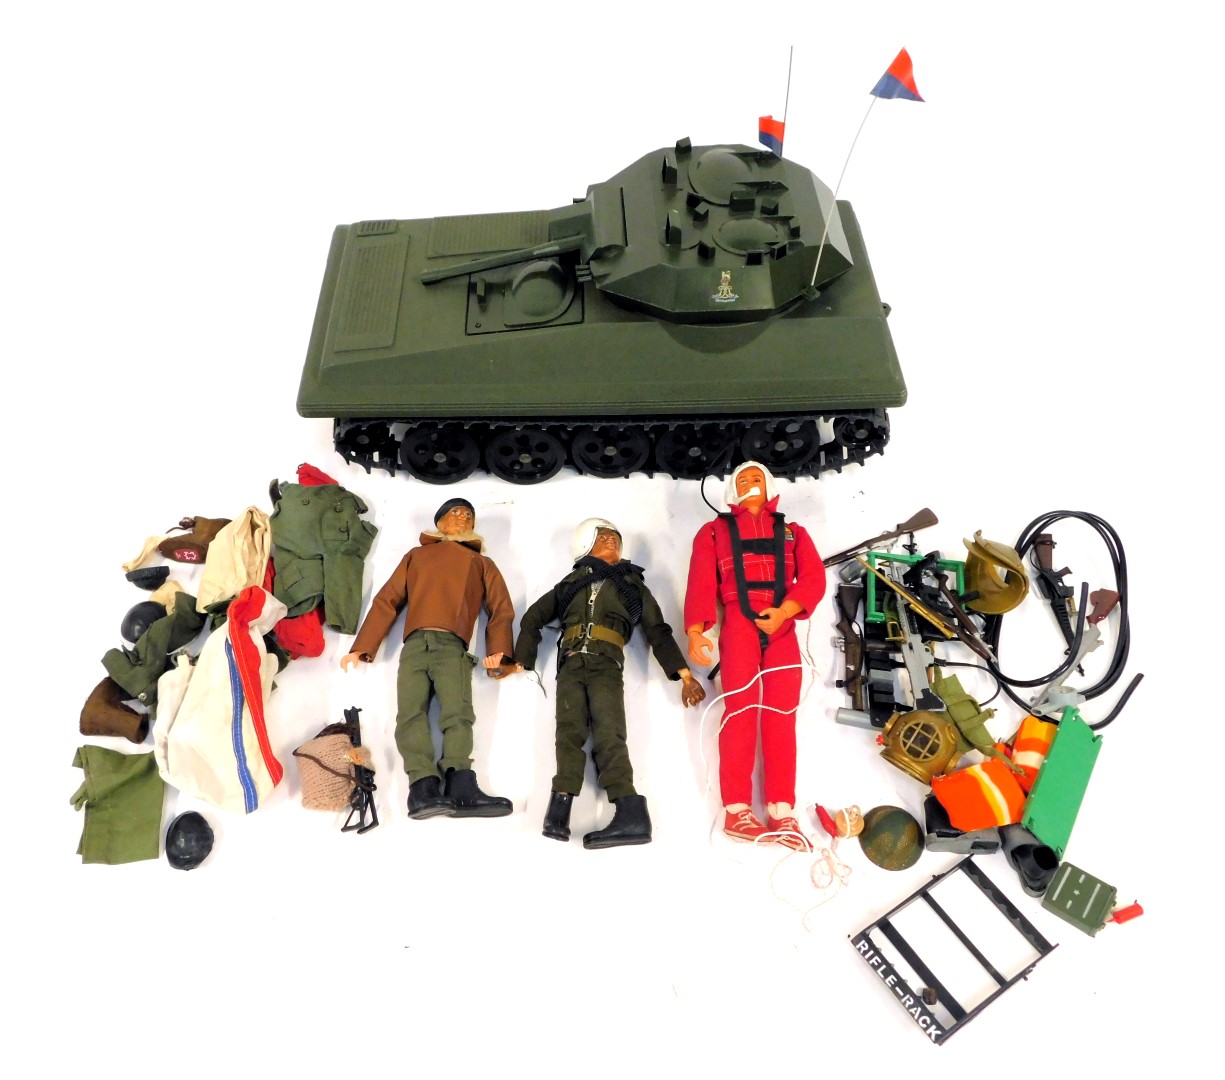 Action Man figures and accessories, including battle tank, accessories, weapons, etc., and a Kenner